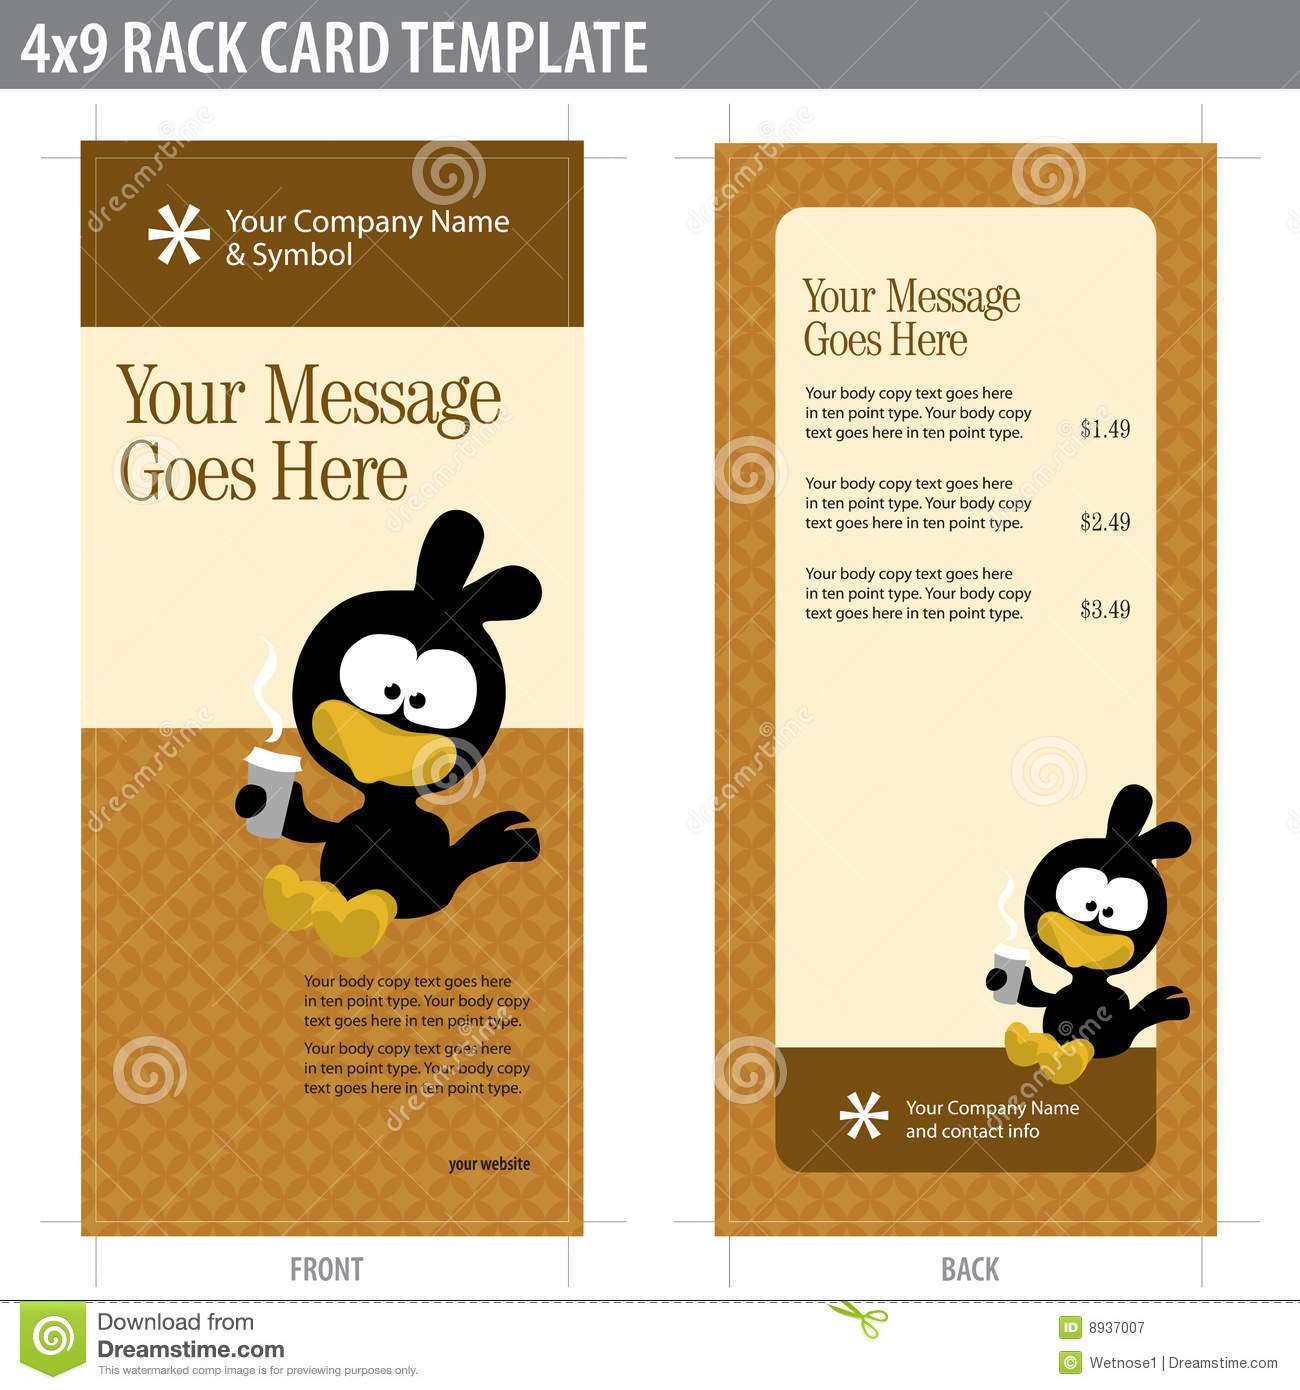 14 Customize Our Free 4X9 Rack Card Template Free in Photoshop with 4X9 Rack Card Template Free